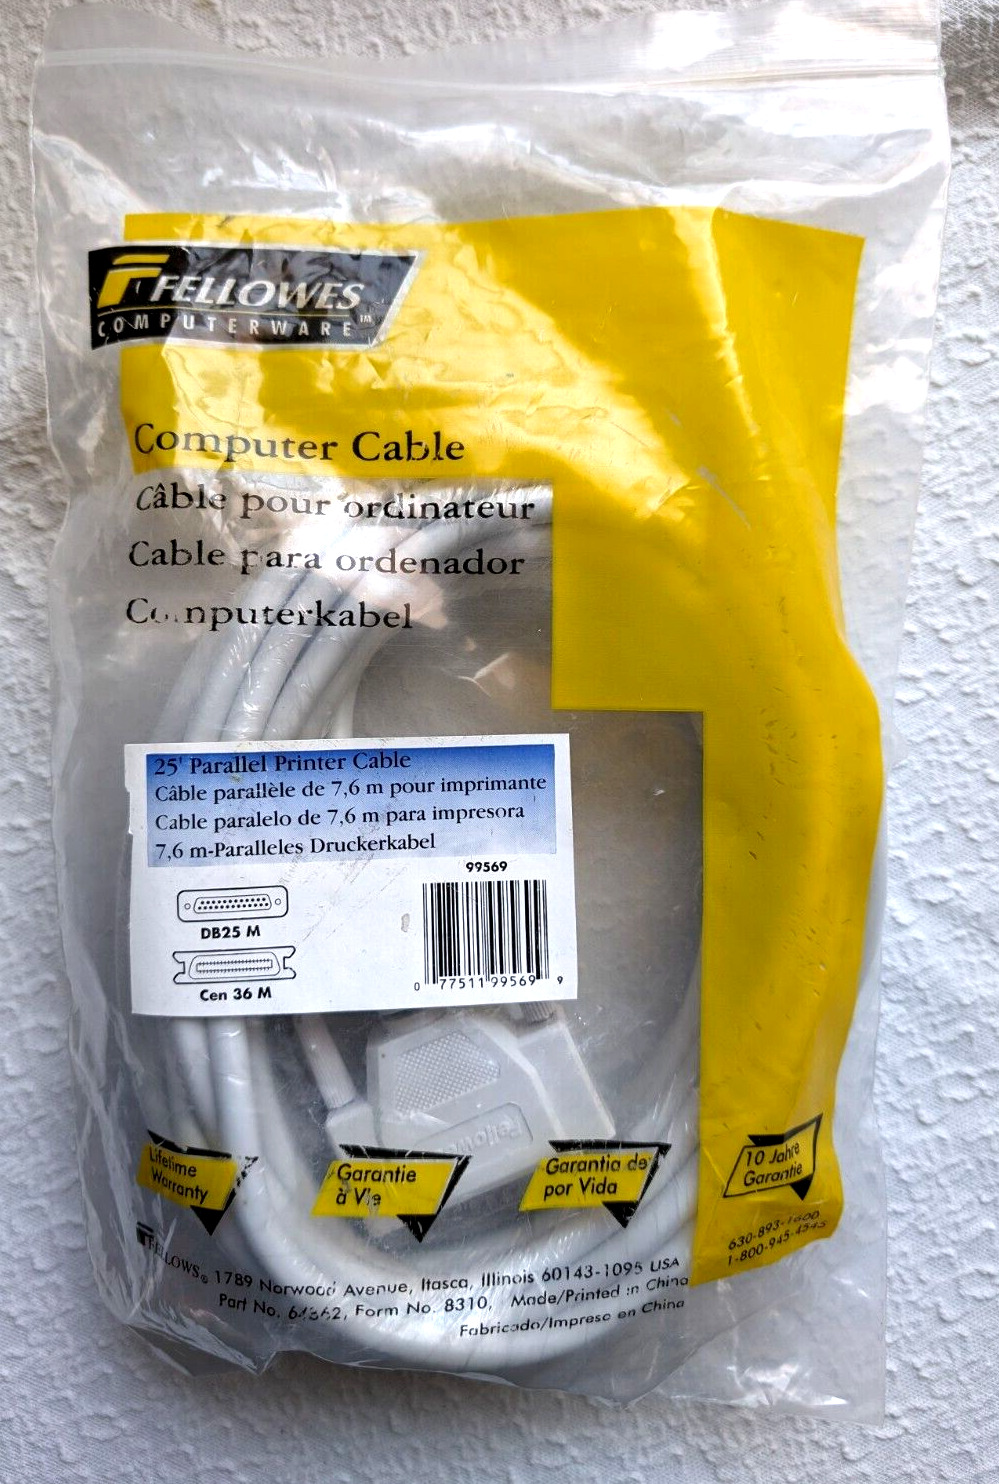 Fellowes 25 FT Parallel Printer Computer Cable DB25 M to Cen 36M  99569